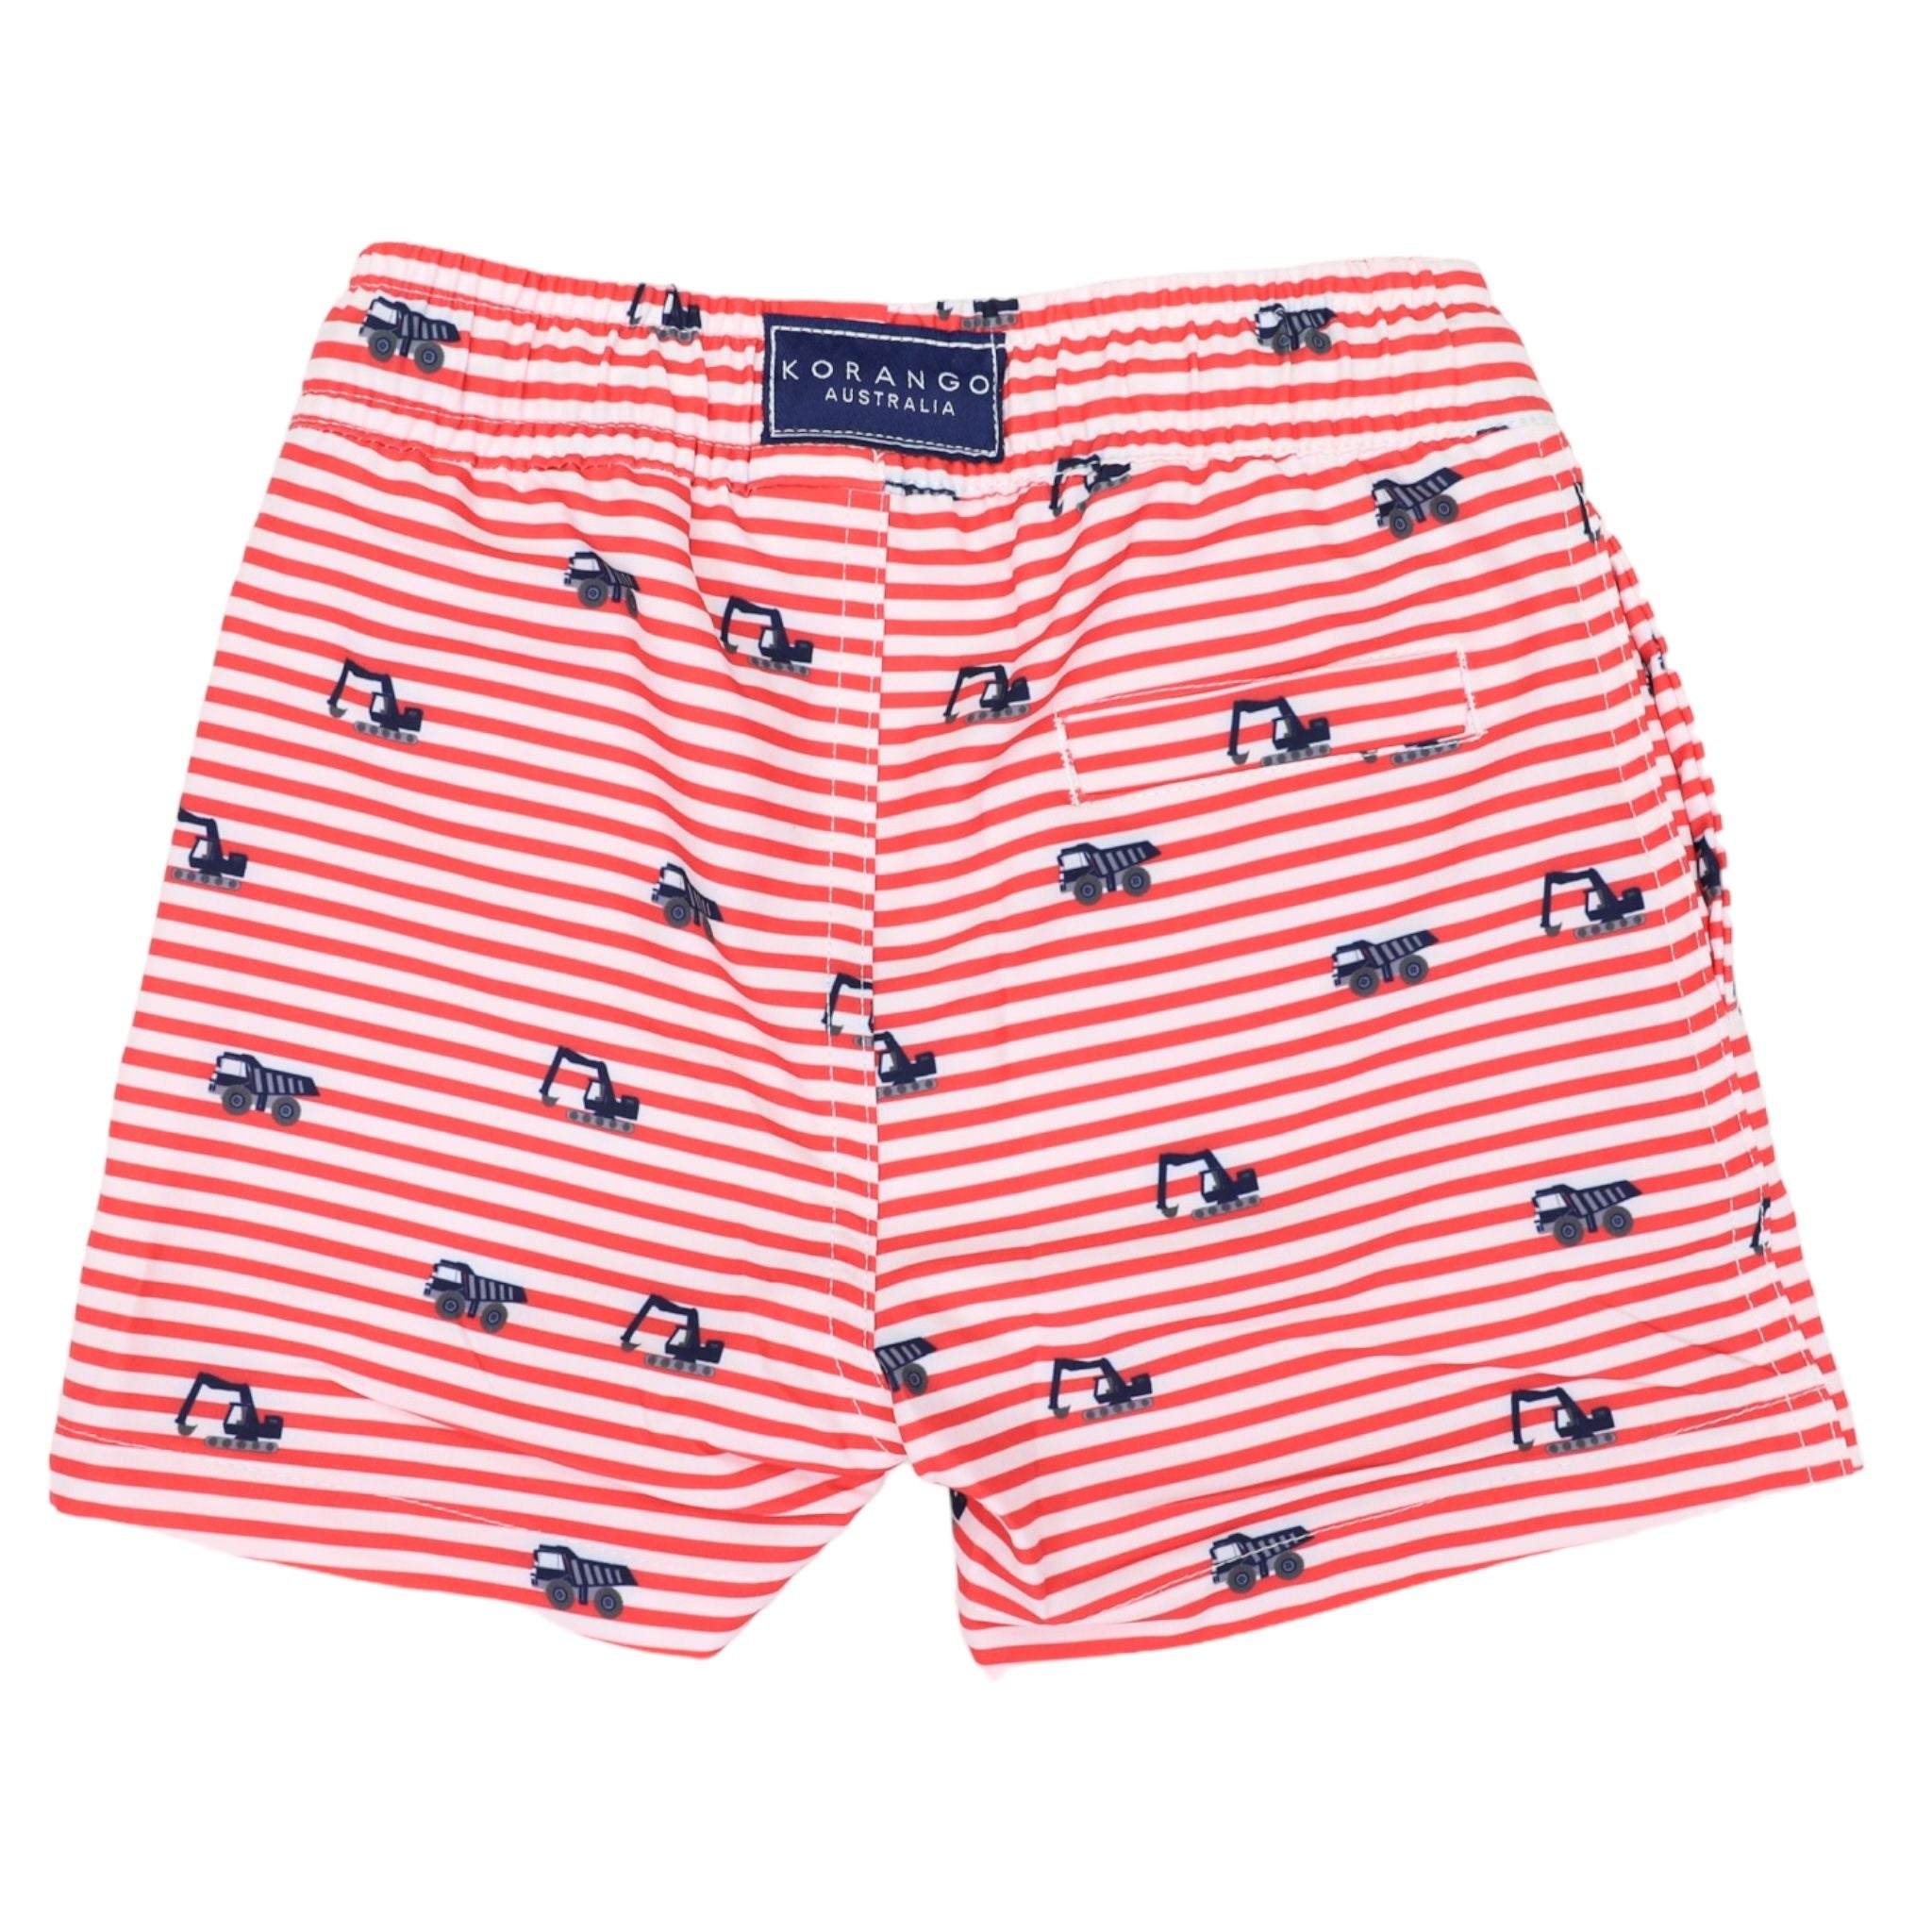 Truck Print Striped Boardies - Red/White